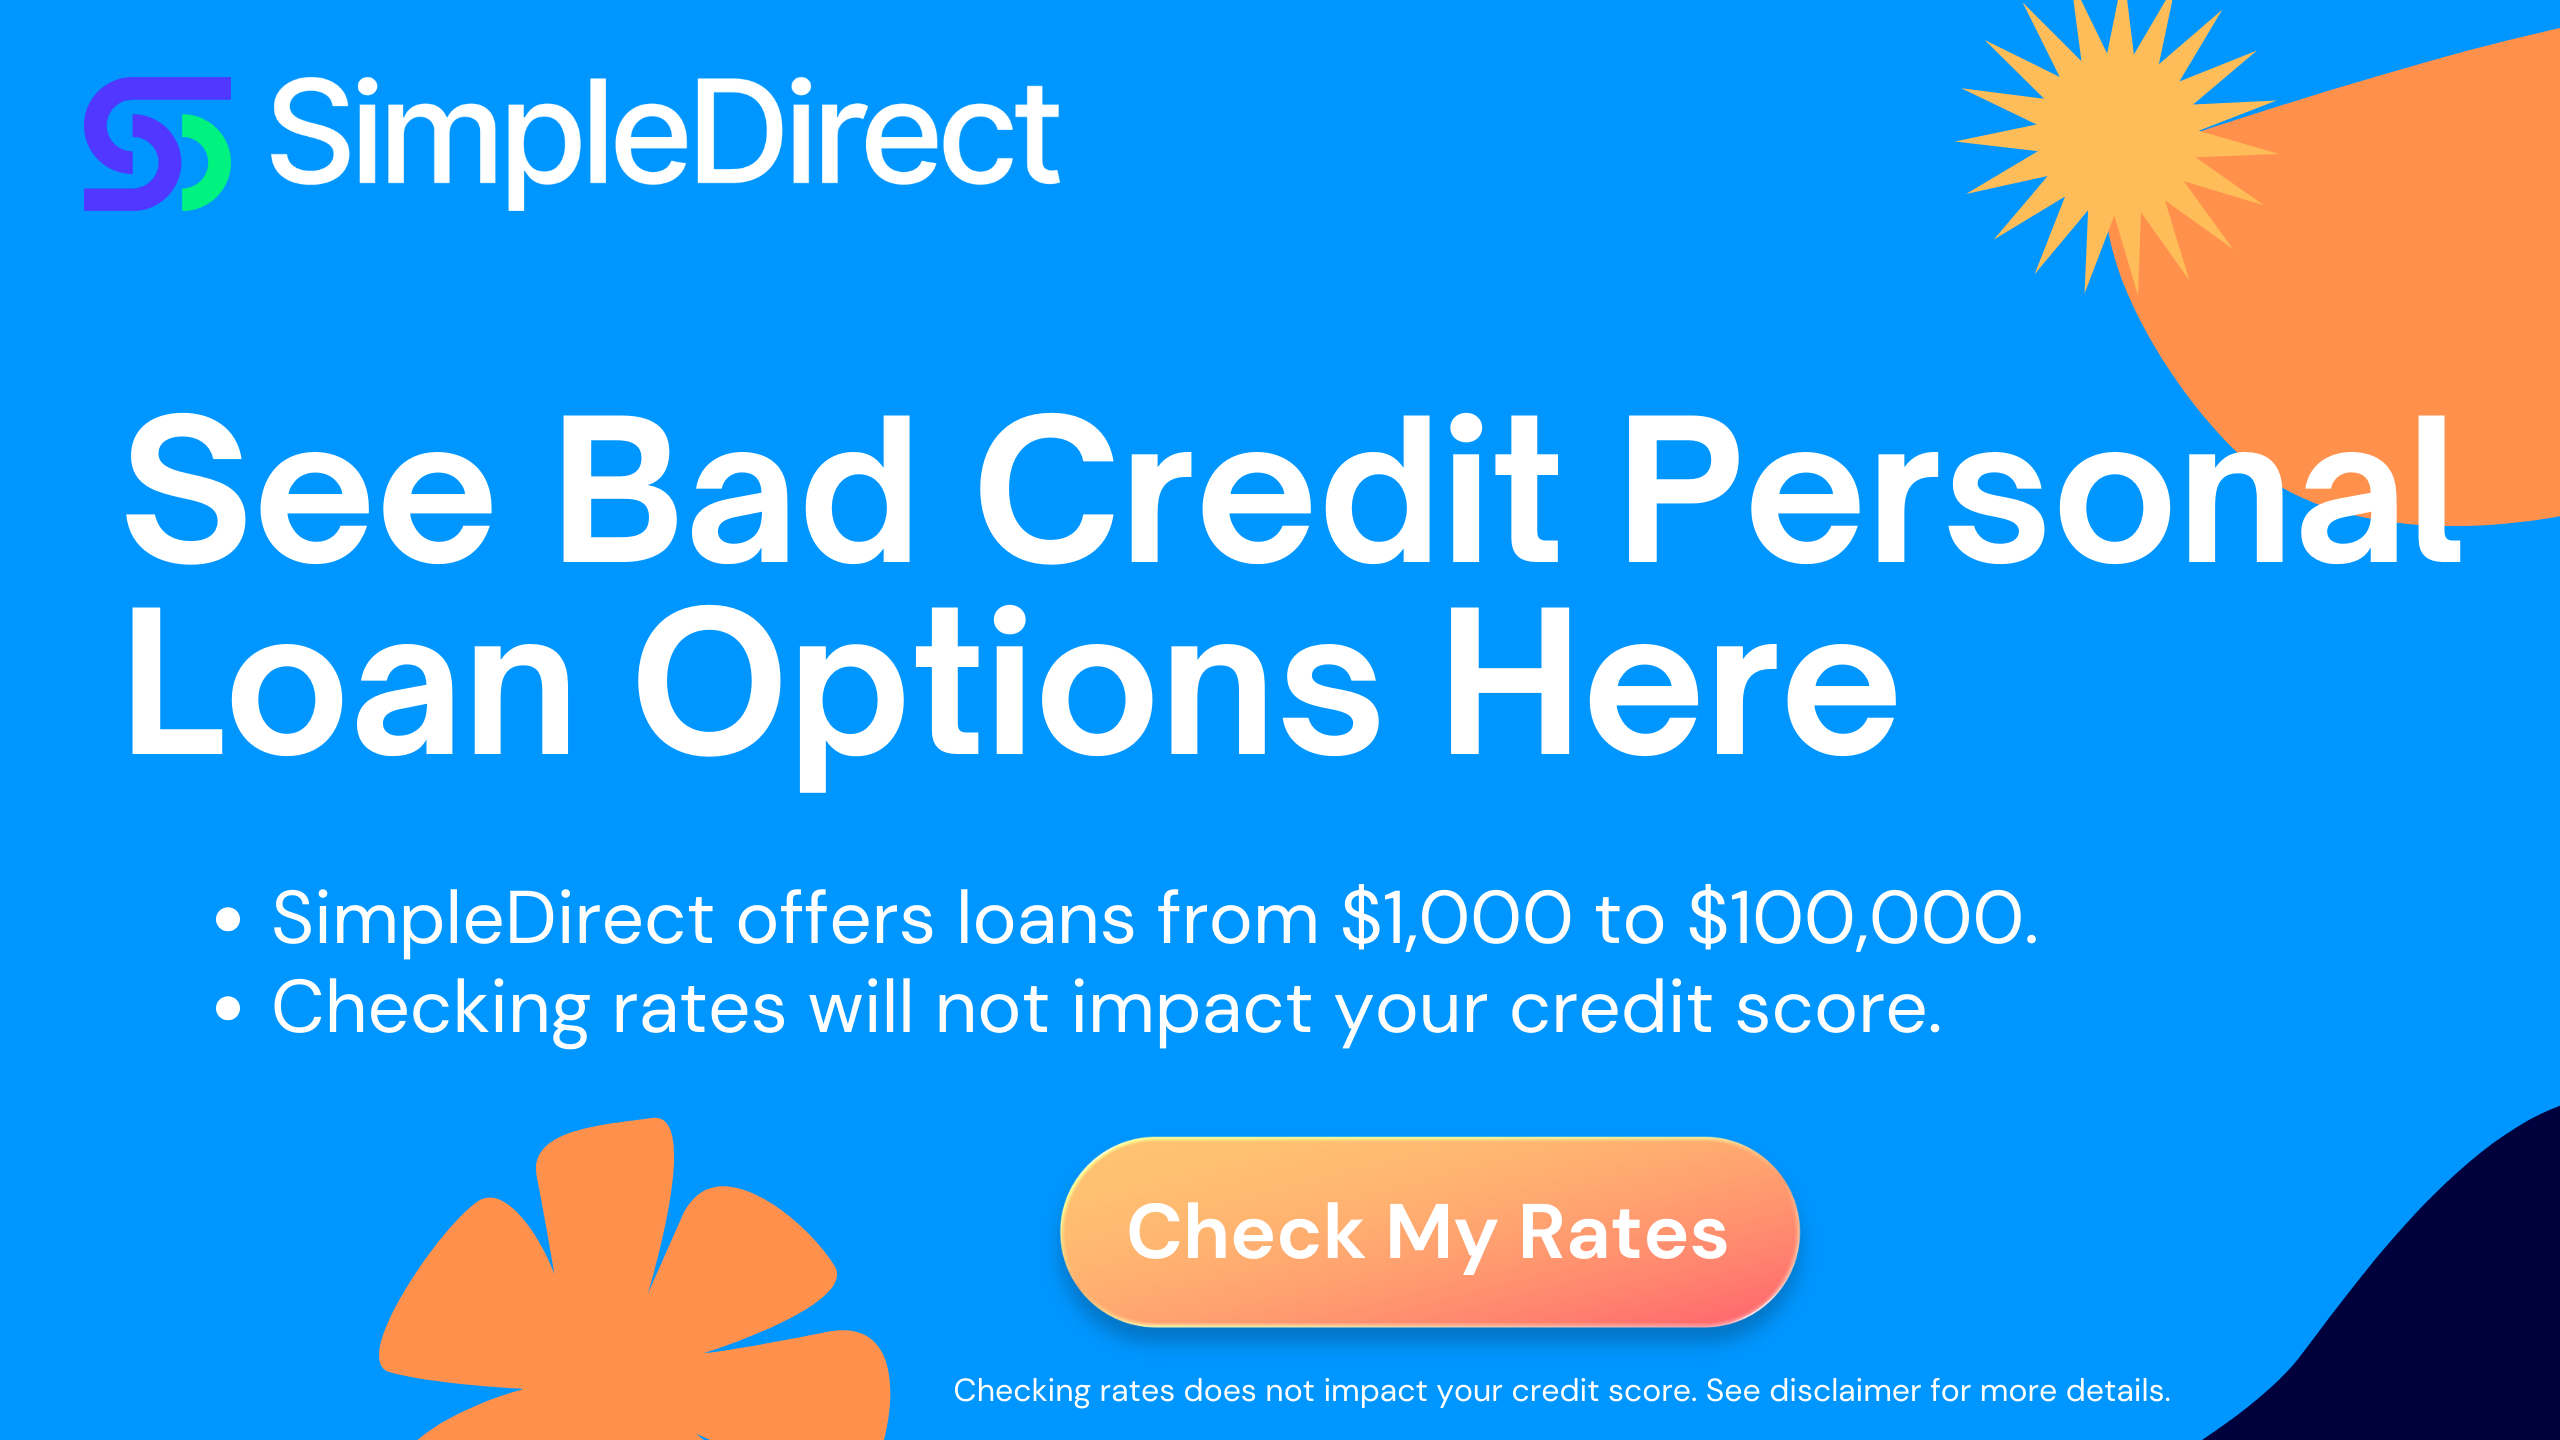 see a list of bad credit personal loan options directly on SimpleDirect.